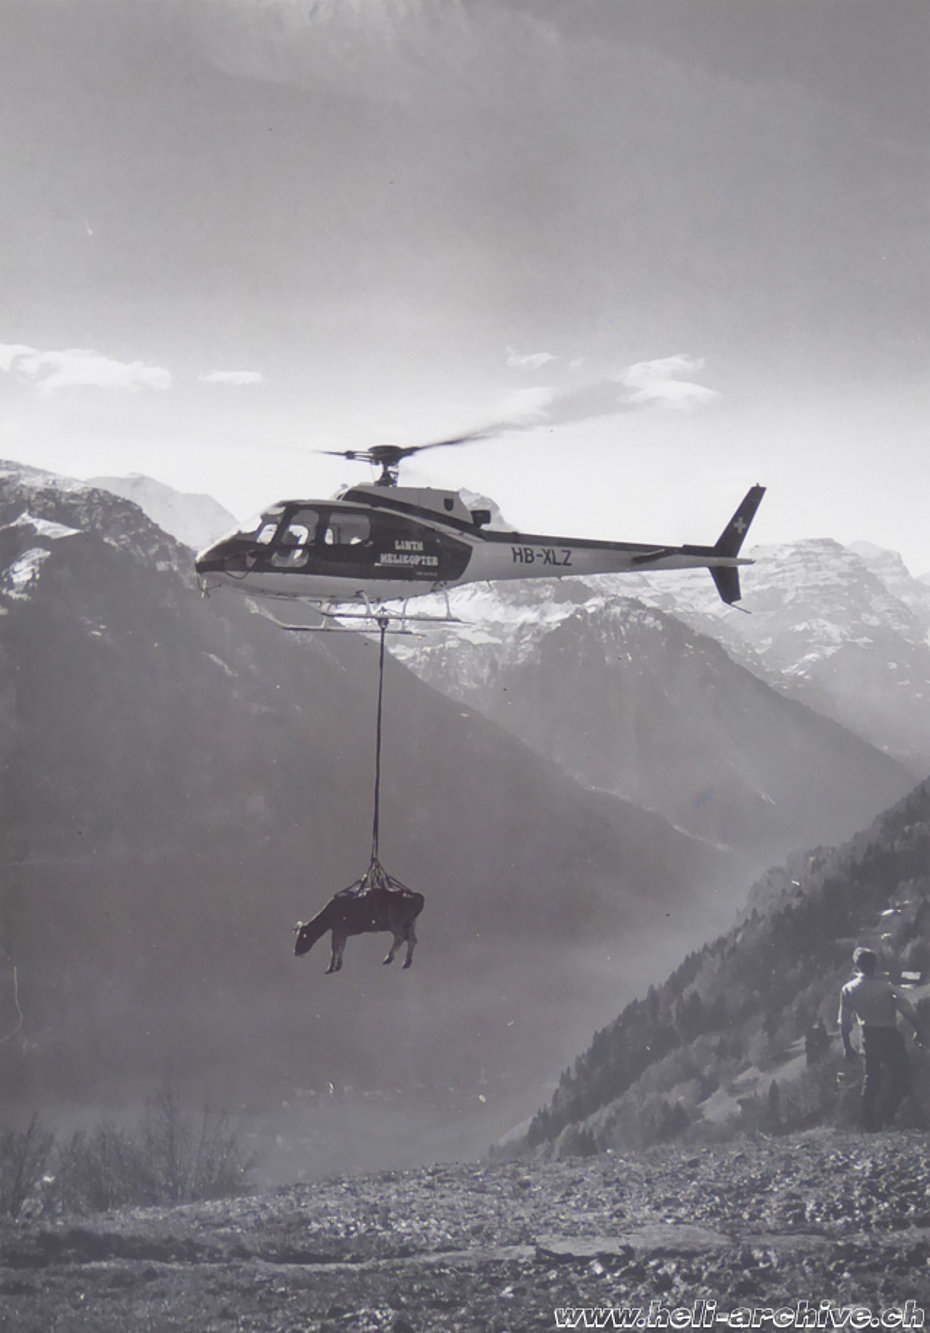 Glarus Alps, early 1980s - An injured cow, hanging in the transport net of the AS 350B Ecureuil HB-XLZ, is airlifted from a mountainous meadow (family Kolesnik)